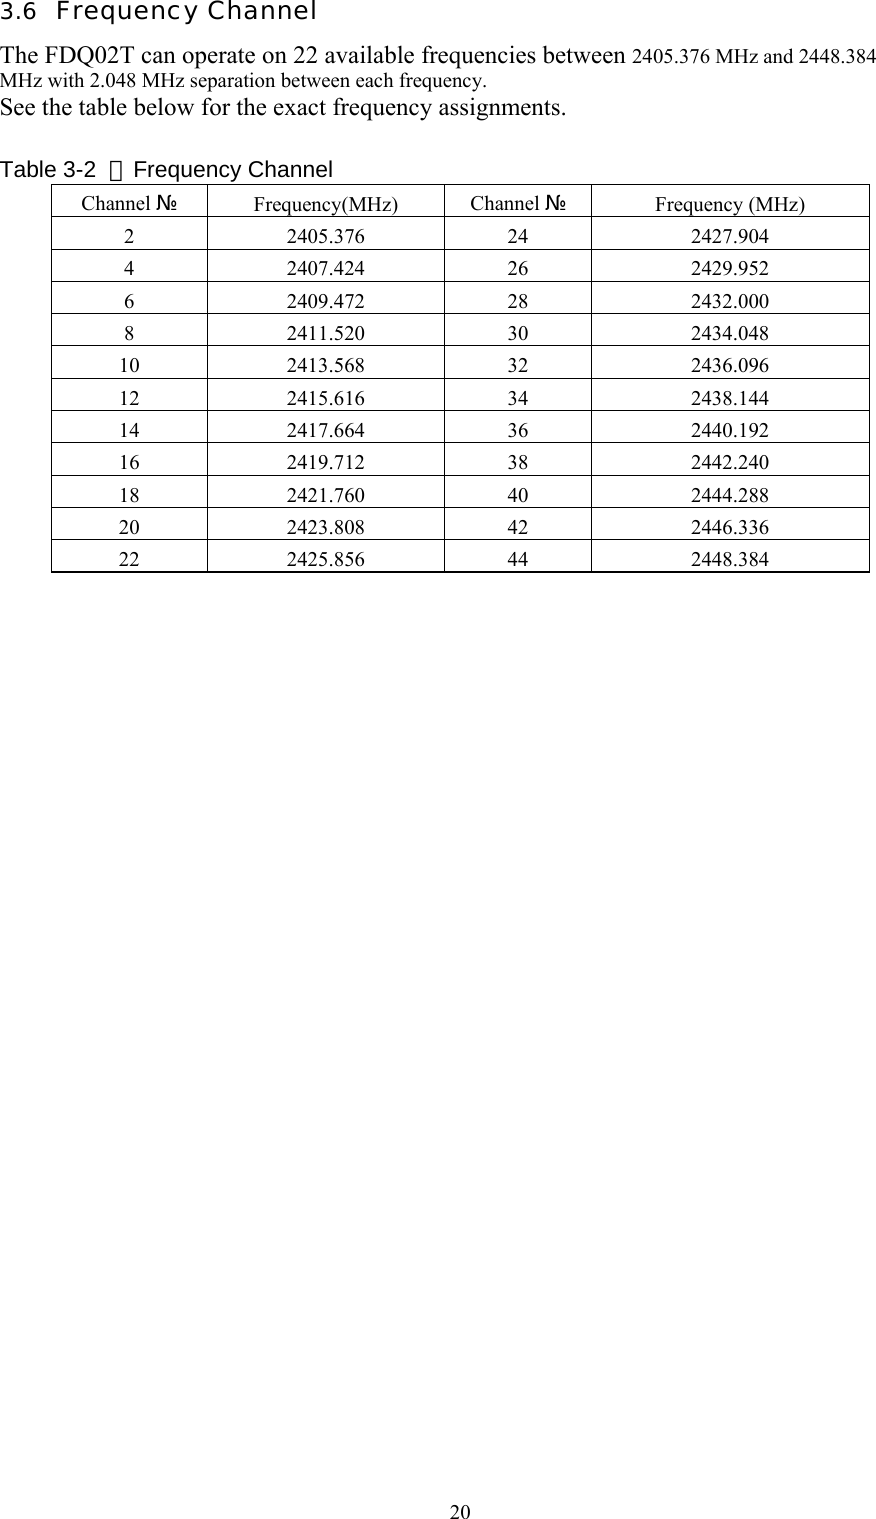  203.6  Frequency Channel The FDQ02T can operate on 22 available frequencies between 2405.376 MHz and 2448.384 MHz with 2.048 MHz separation between each frequency. See the table below for the exact frequency assignments.  Table 3-2  ：  Frequency Channel Channel № Frequency(MHz)  Channel № Frequency (MHz) 2 2405.376 24  2427.904 4 2407.424 26  2429.952 6 2409.472 28  2432.000 8 2411.520 30  2434.048 10 2413.568 32  2436.096 12 2415.616 34  2438.144 14 2417.664 36  2440.192 16 2419.712 38  2442.240 18 2421.760 40  2444.288 20 2423.808 42  2446.336 22 2425.856 44  2448.384     